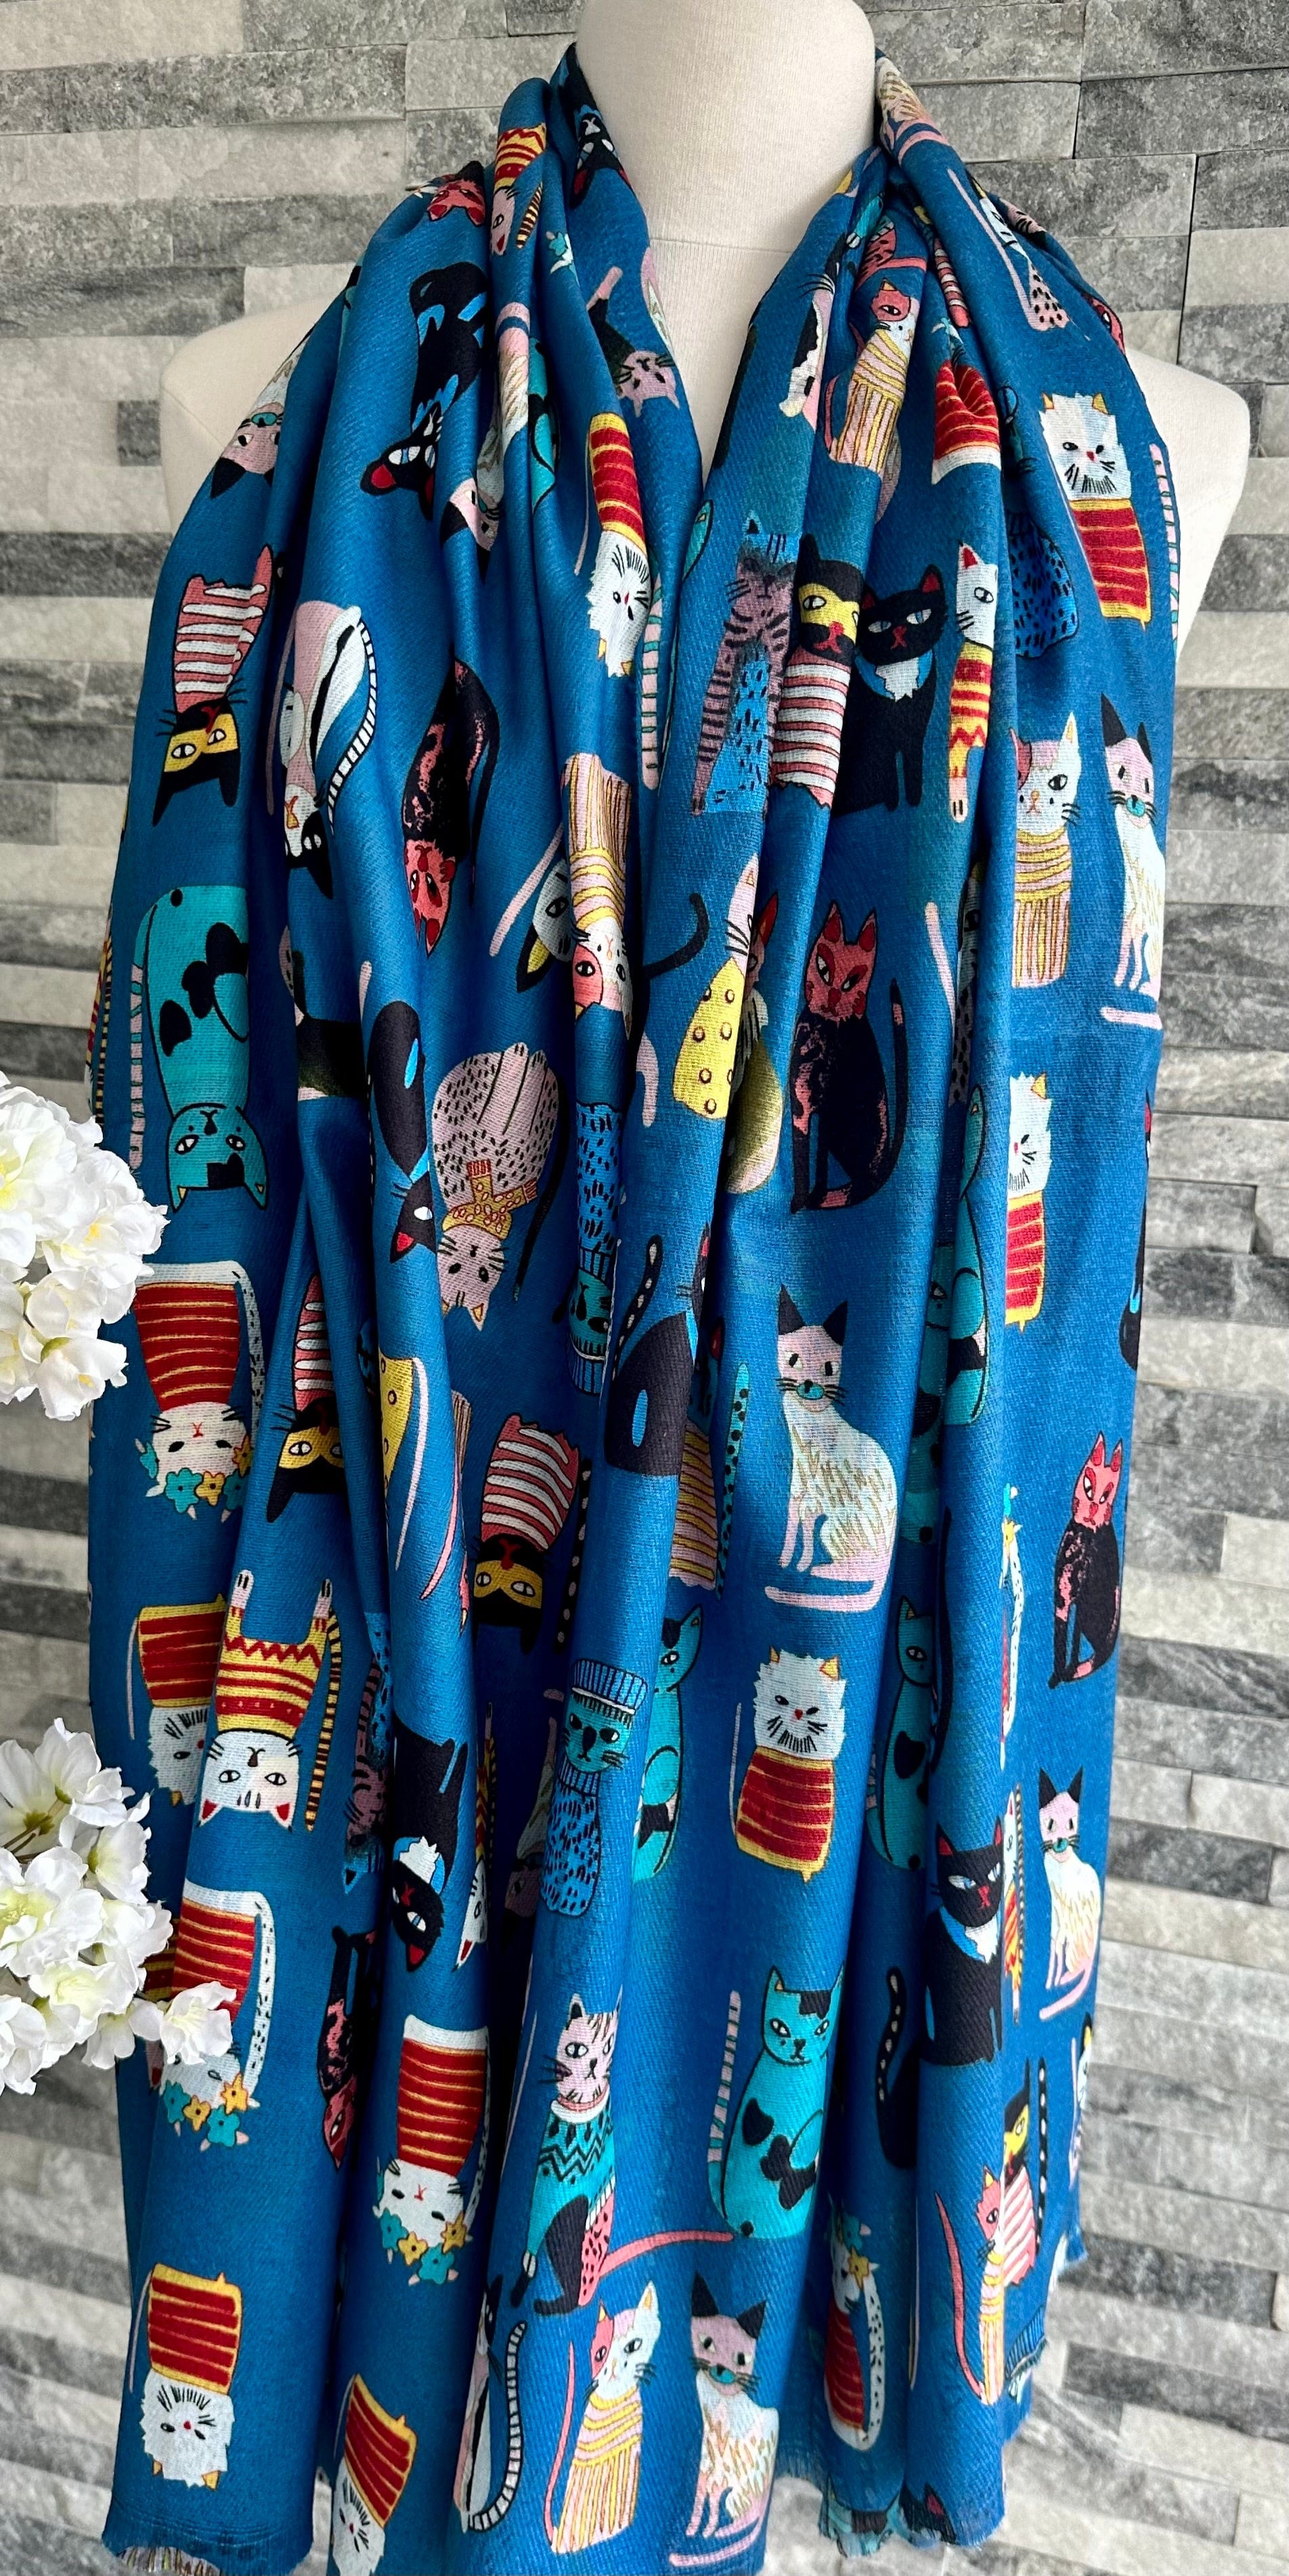 lusciousscarves Ladies Blue Scarf with Colourful Cats Design, Cotton Blend